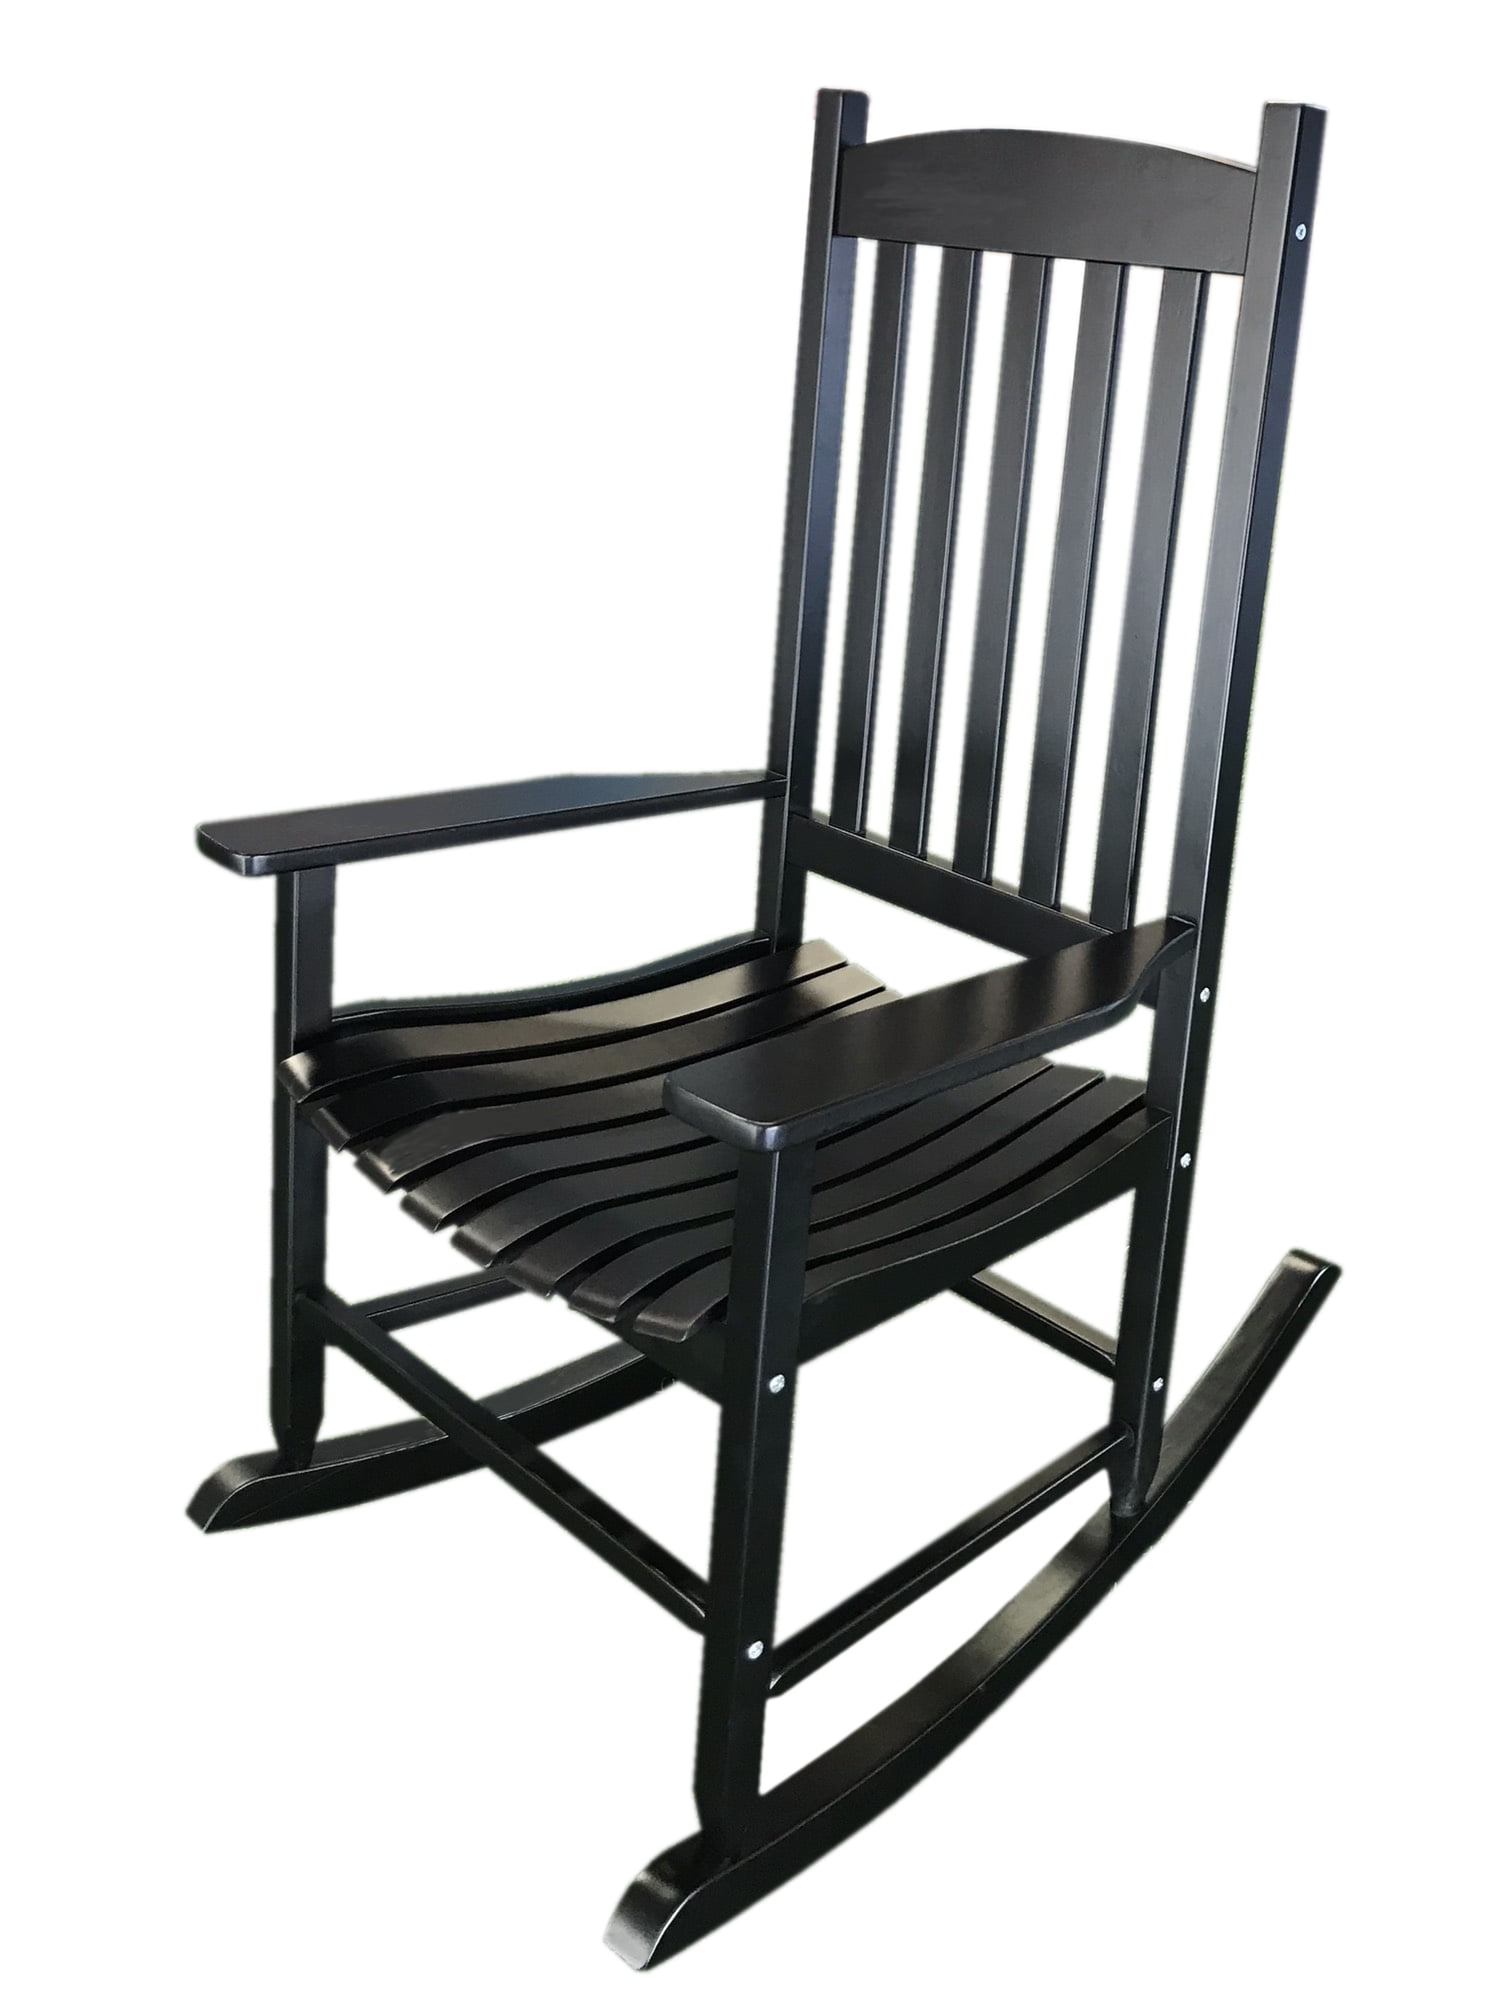 Mainstays Outdoor Wood Slat Rocking, Mainstays Outdoor Wood Porch Rocking Chair Black